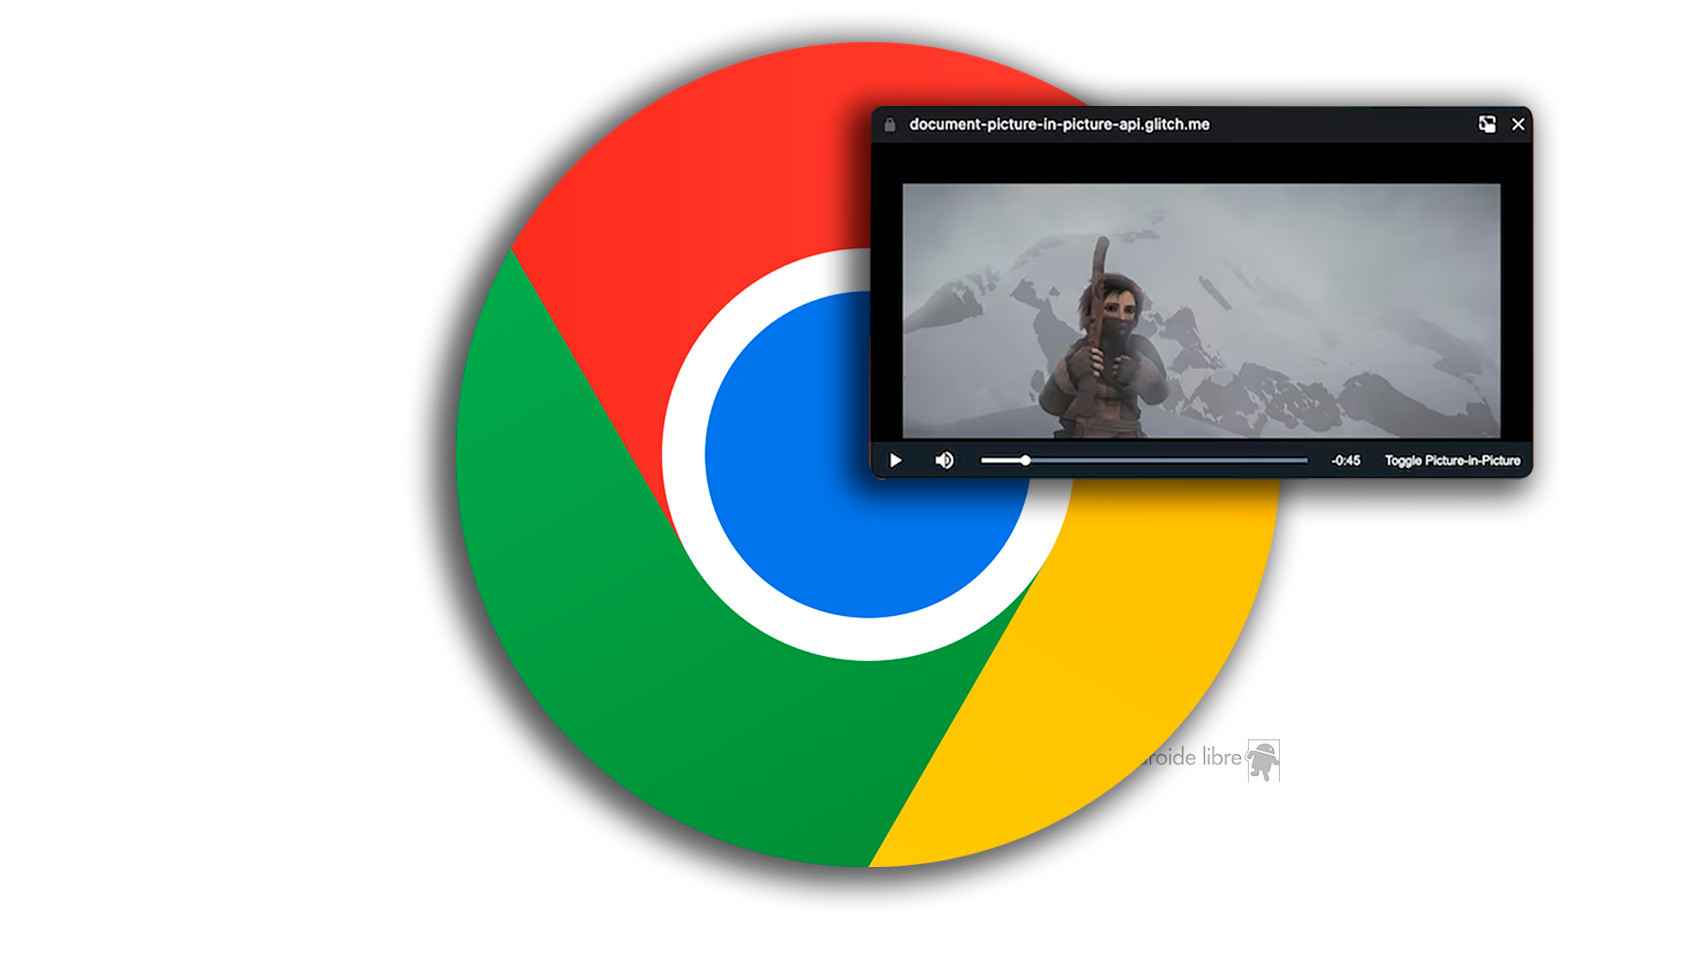 Chrome is updated in the beta with a novelty that improves PIP mode